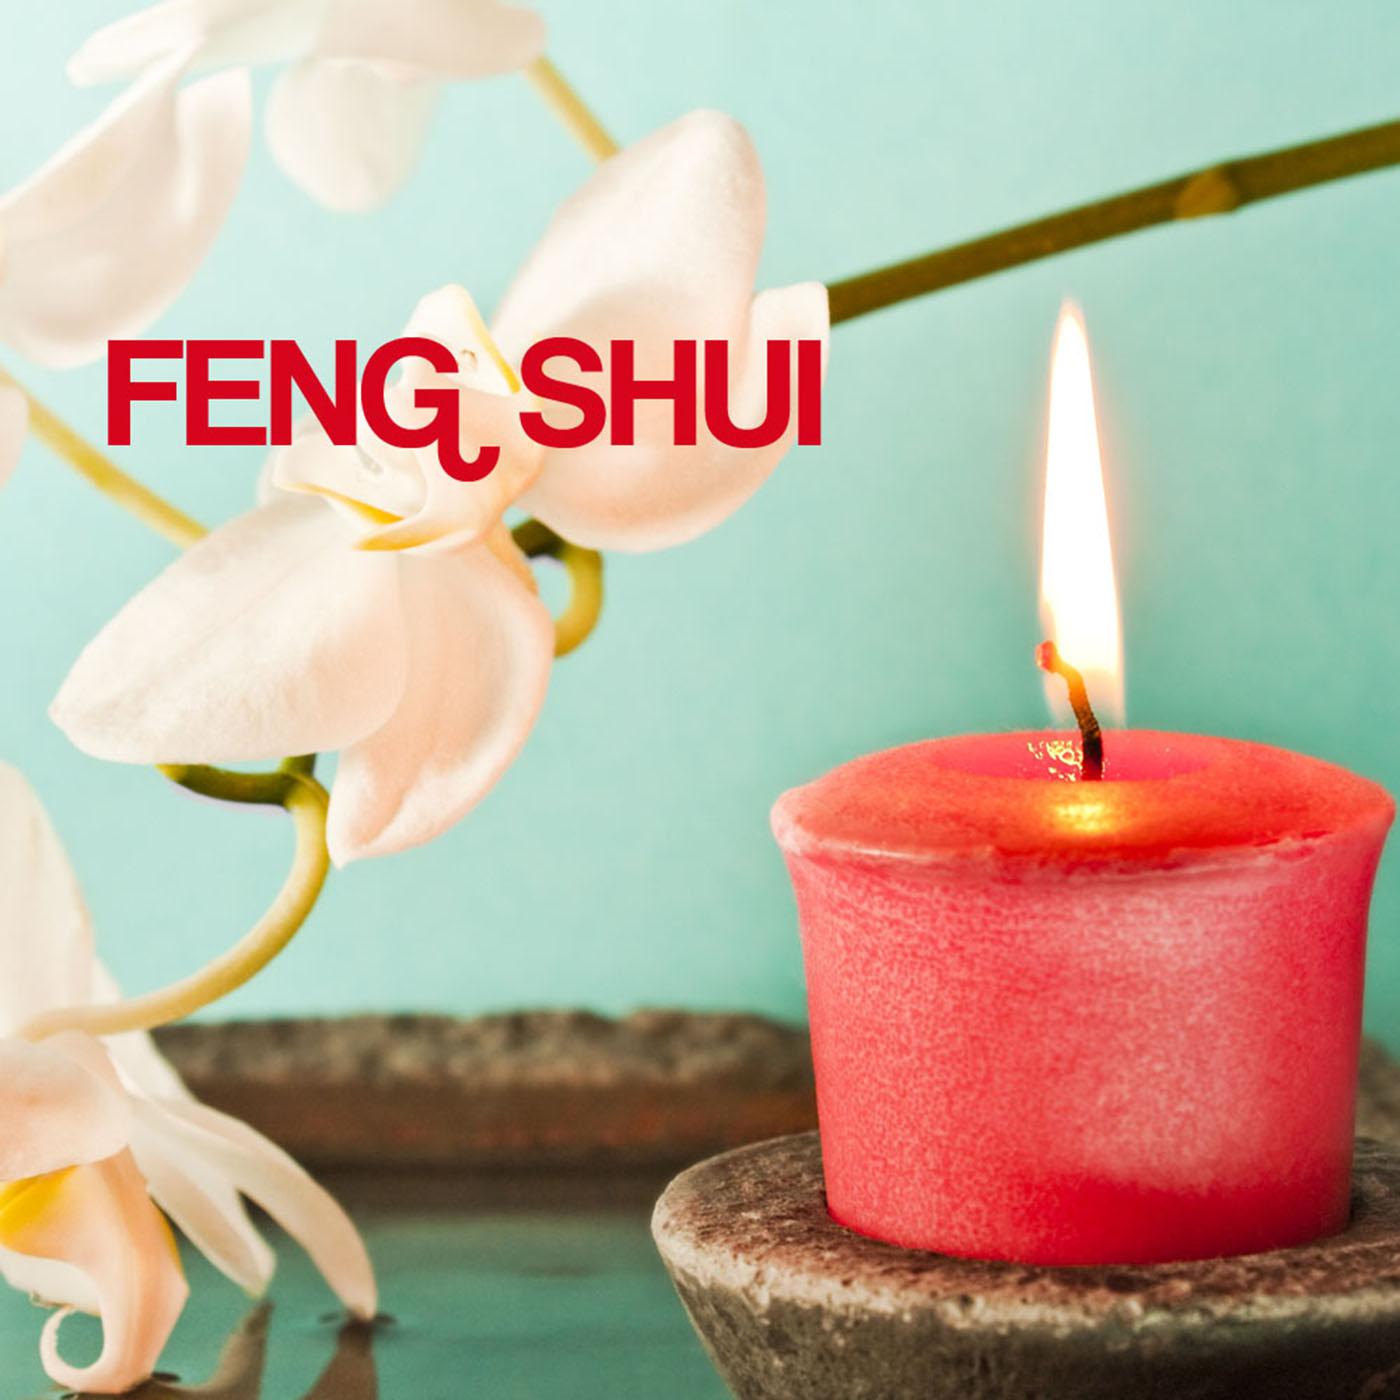 Feng Shui: Serenity Healing Music and Relaxing Songs, Music Therapy, Wellness, Relax, Sleep Music and Fengshui Meditation